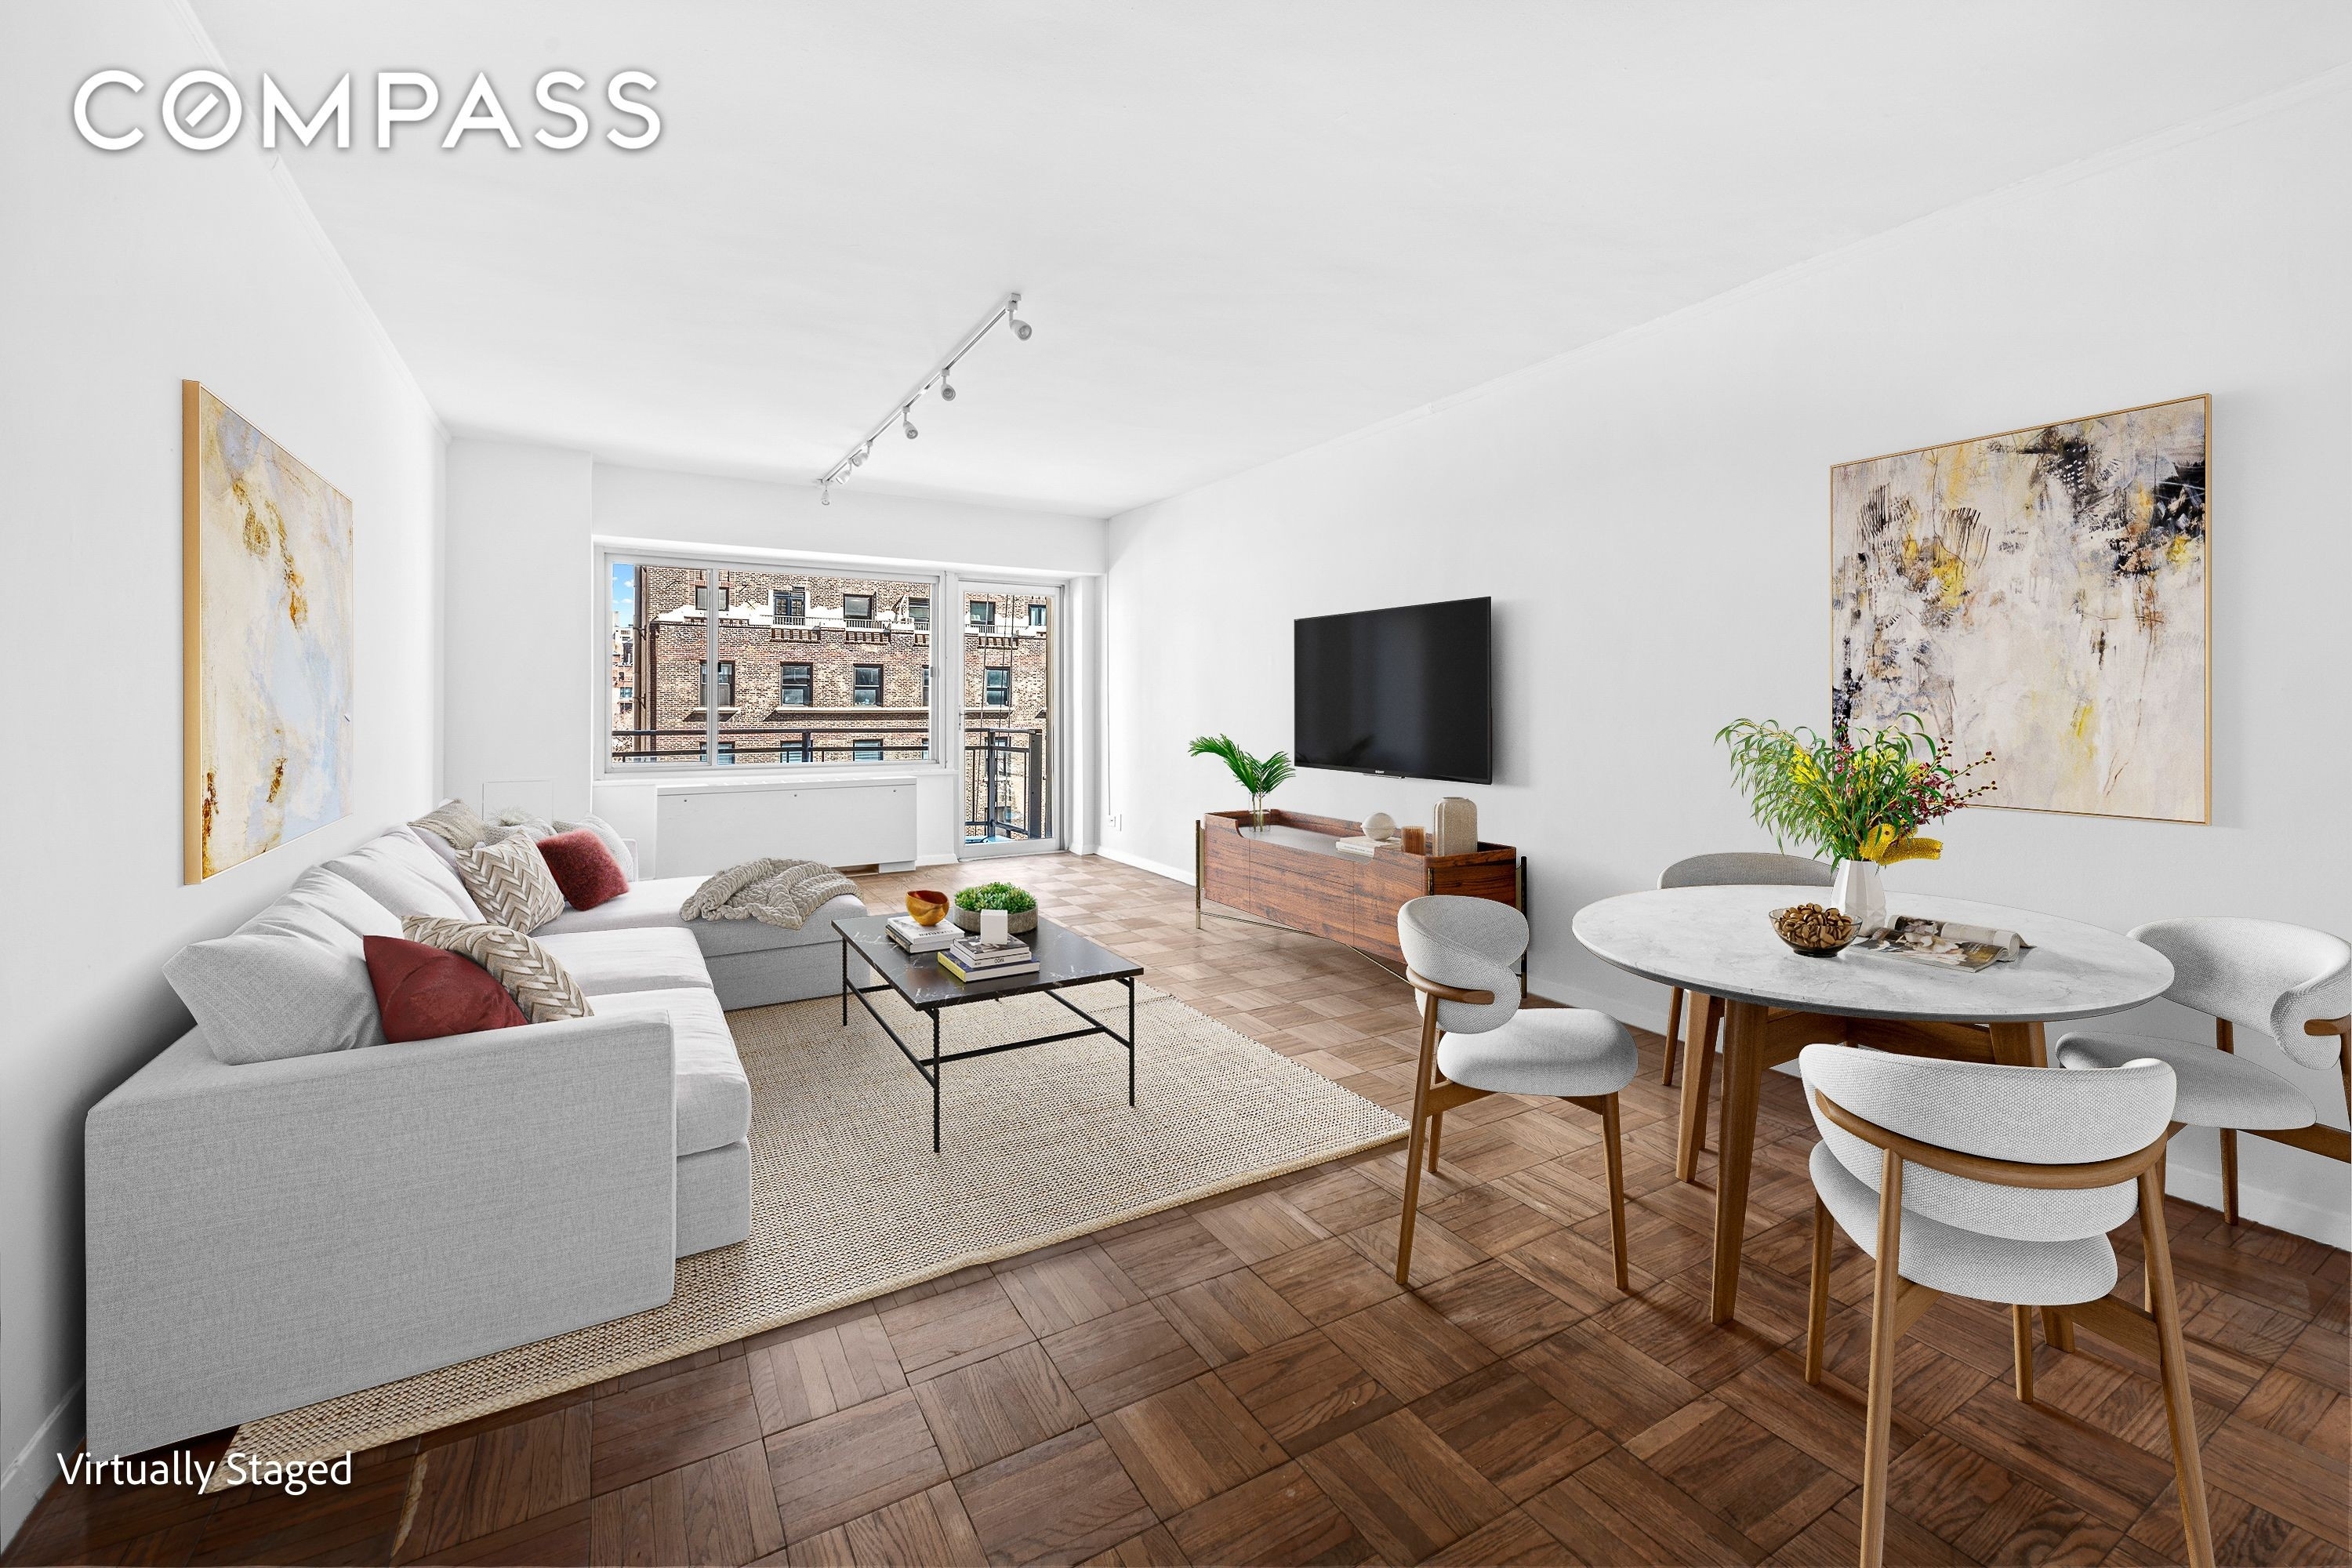 Co-op Properties for Sale at Plaza Tower, 118 E 60TH ST, 9B Lenox Hill, New York, New York 10022